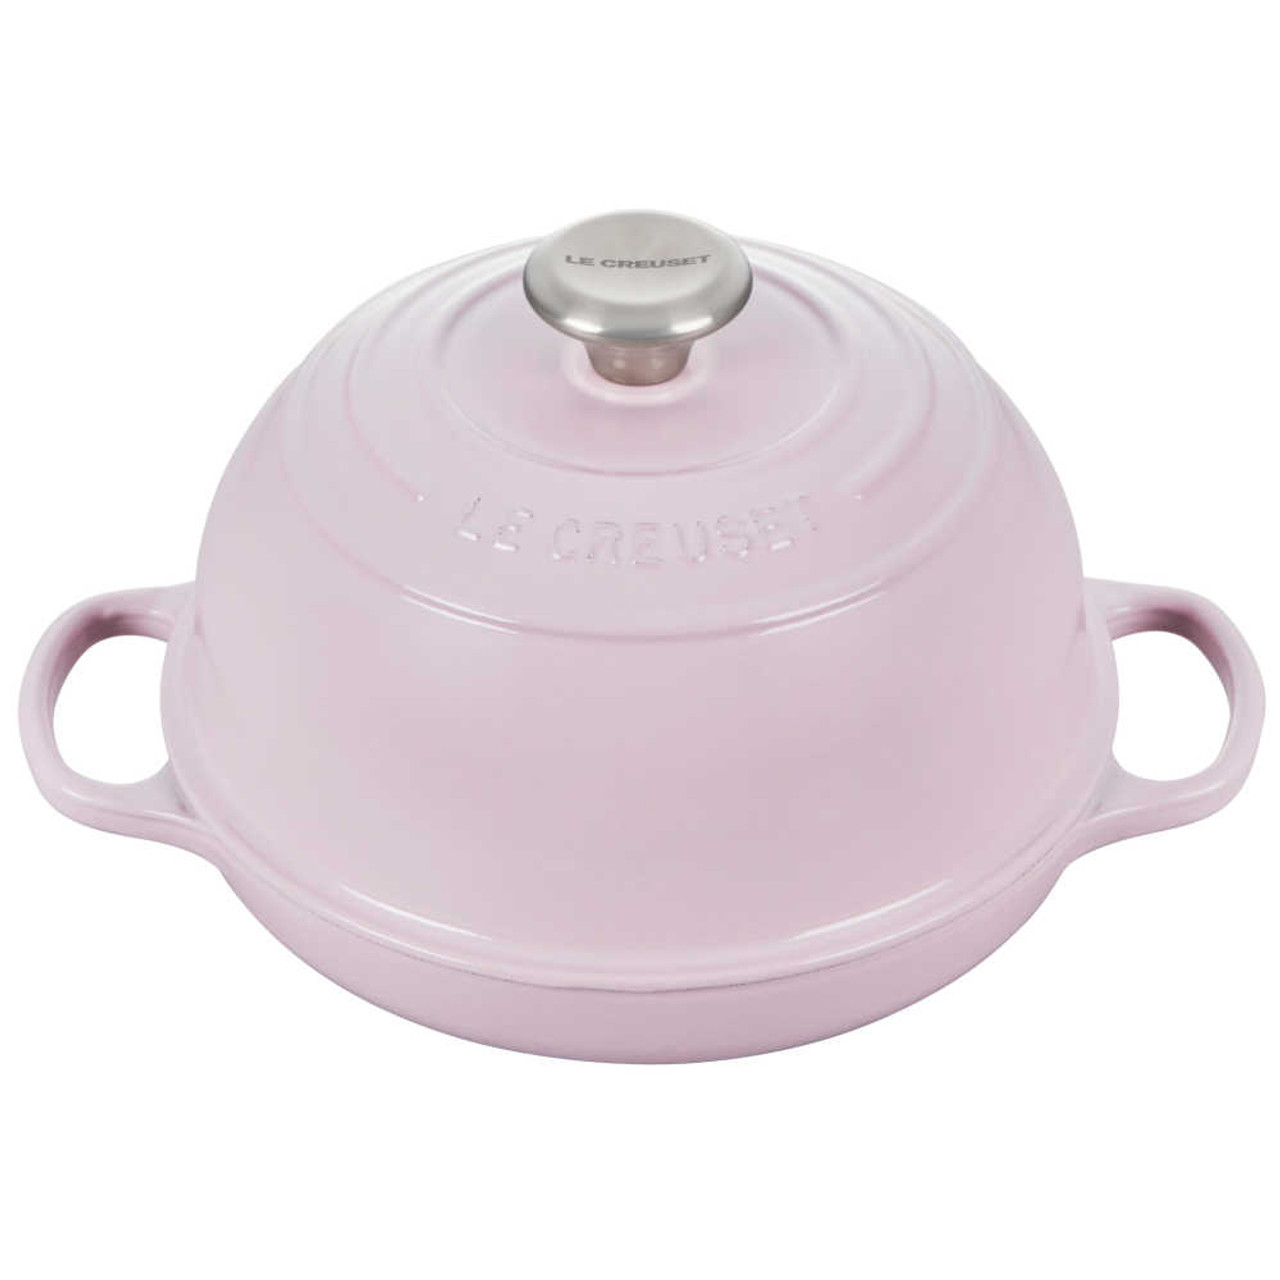 https://cdn11.bigcommerce.com/s-hccytny0od/images/stencil/1280x1280/products/5301/23013/Le_Creuset_Bread_Oven_Shallot__77121.1679426246.jpg?c=2?imbypass=on